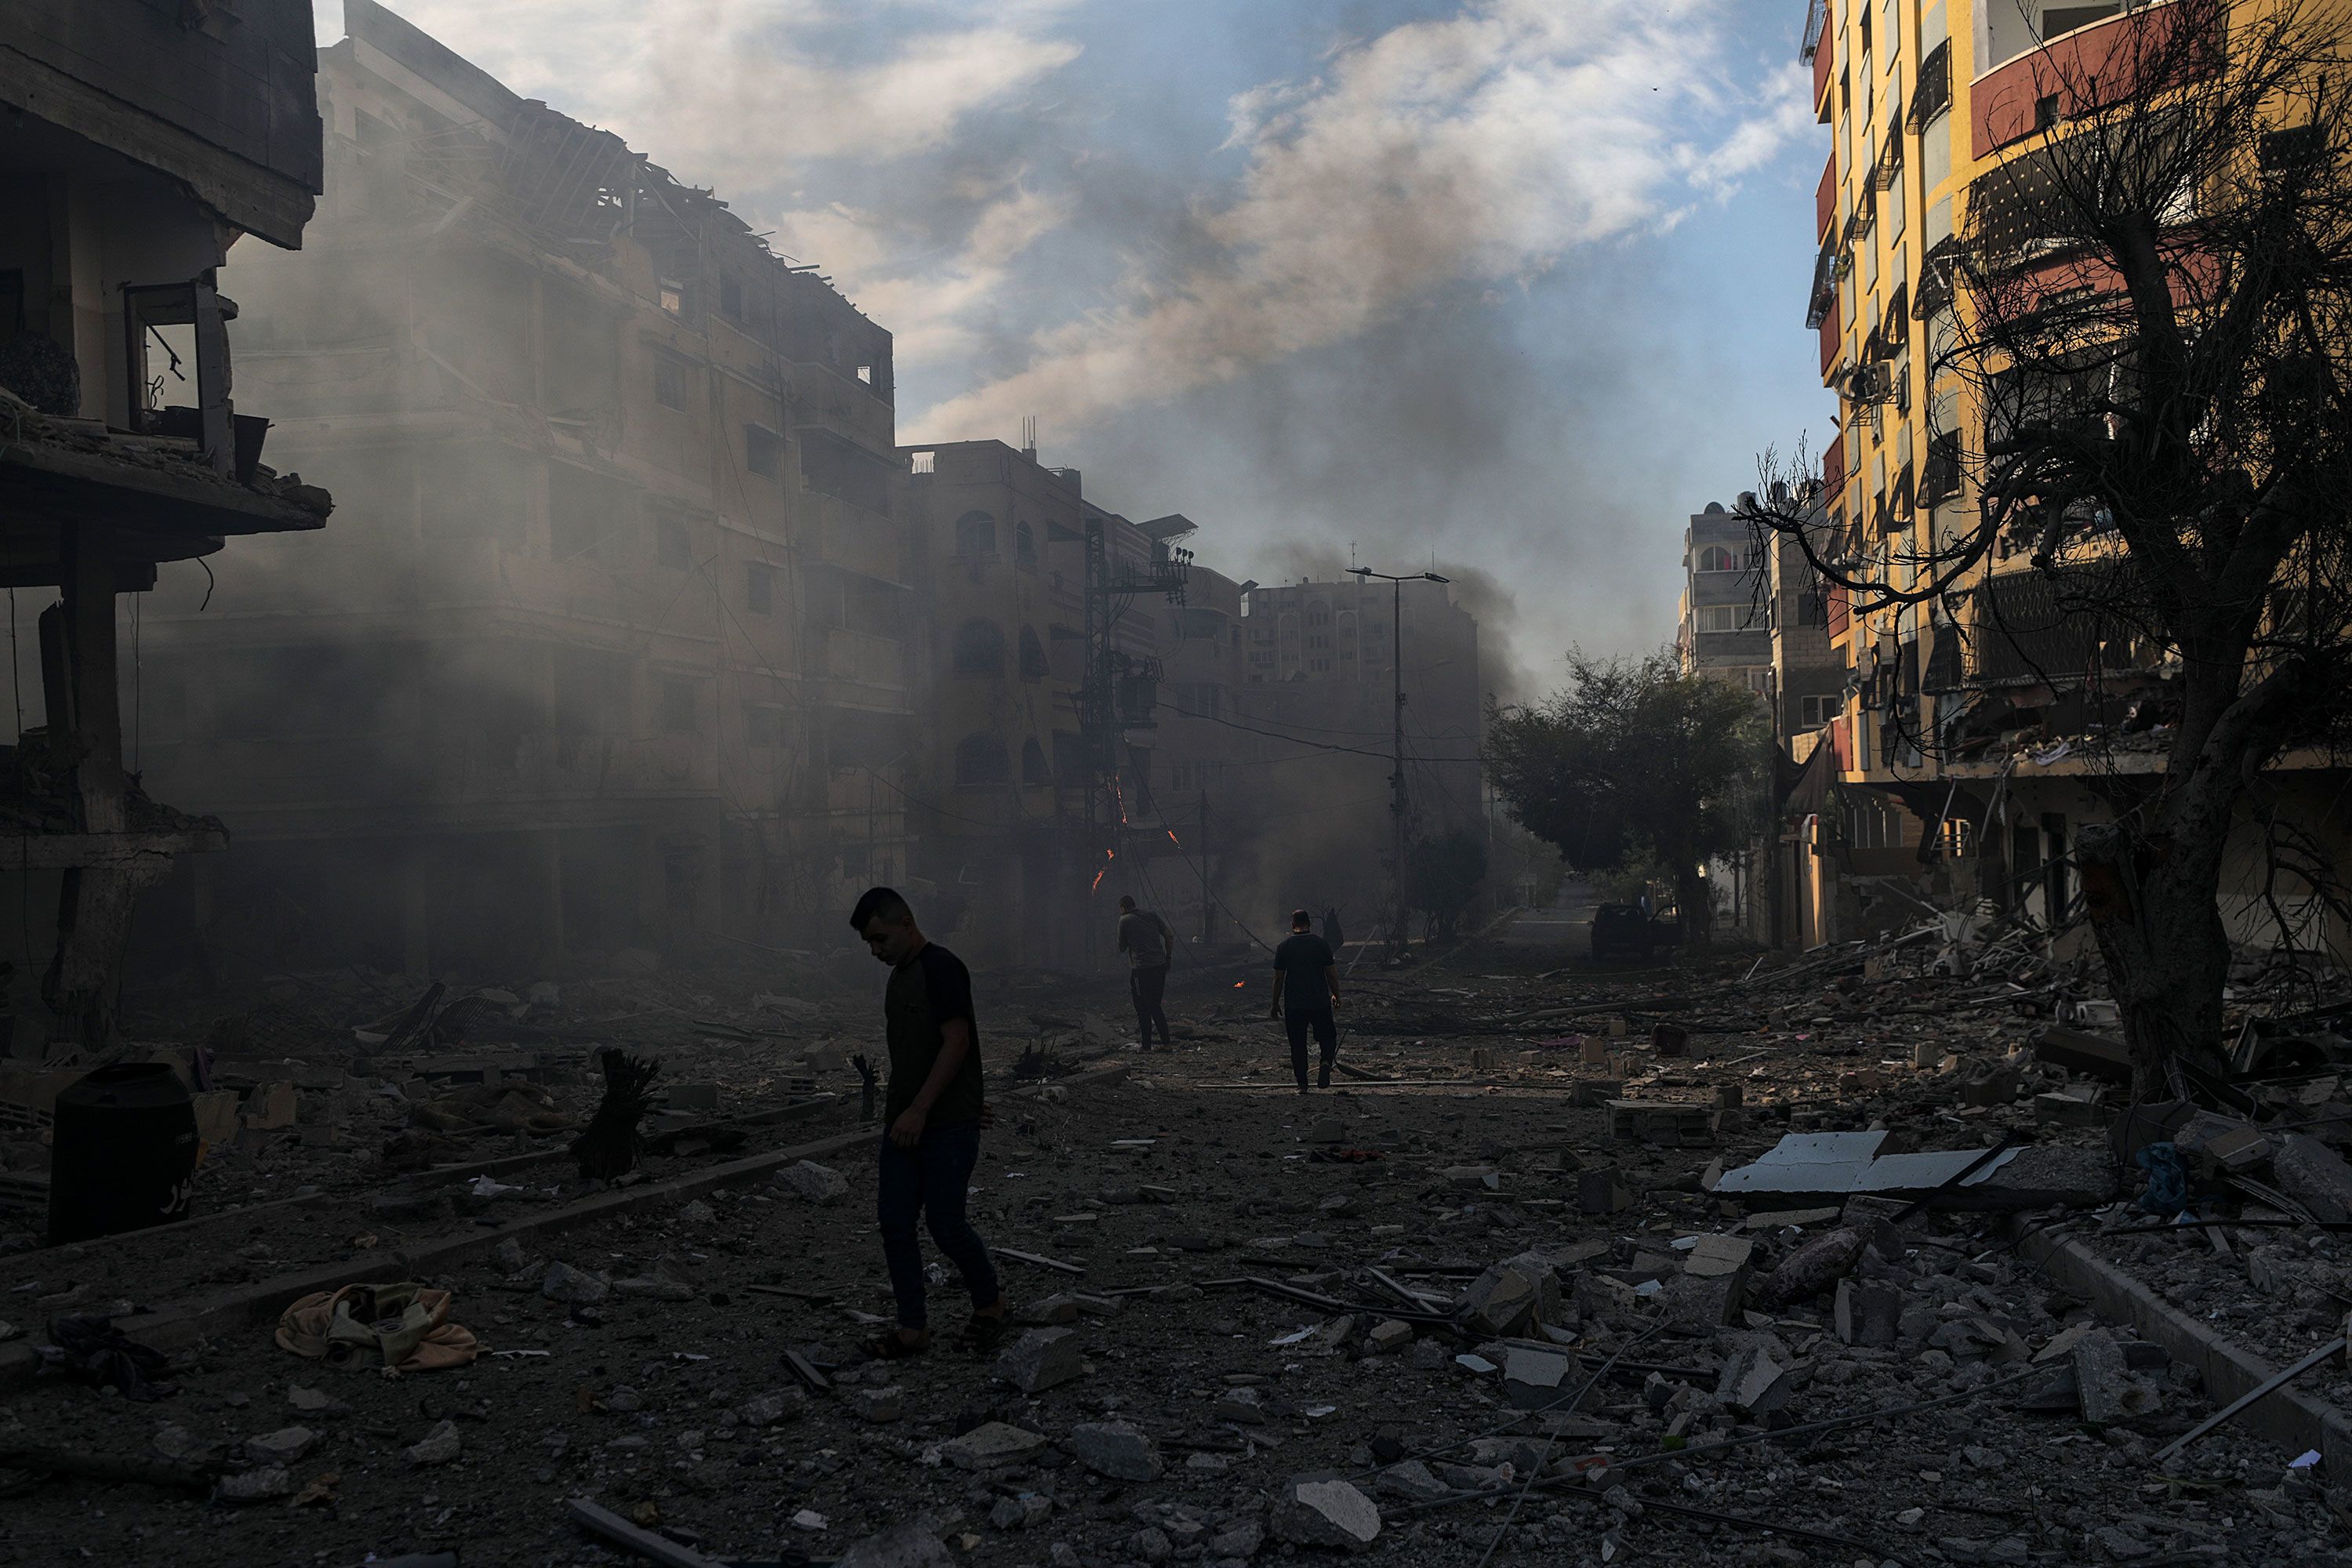 Palestinians inspect a destroyed area following an Israeli airstrike in Gaza on October 21.